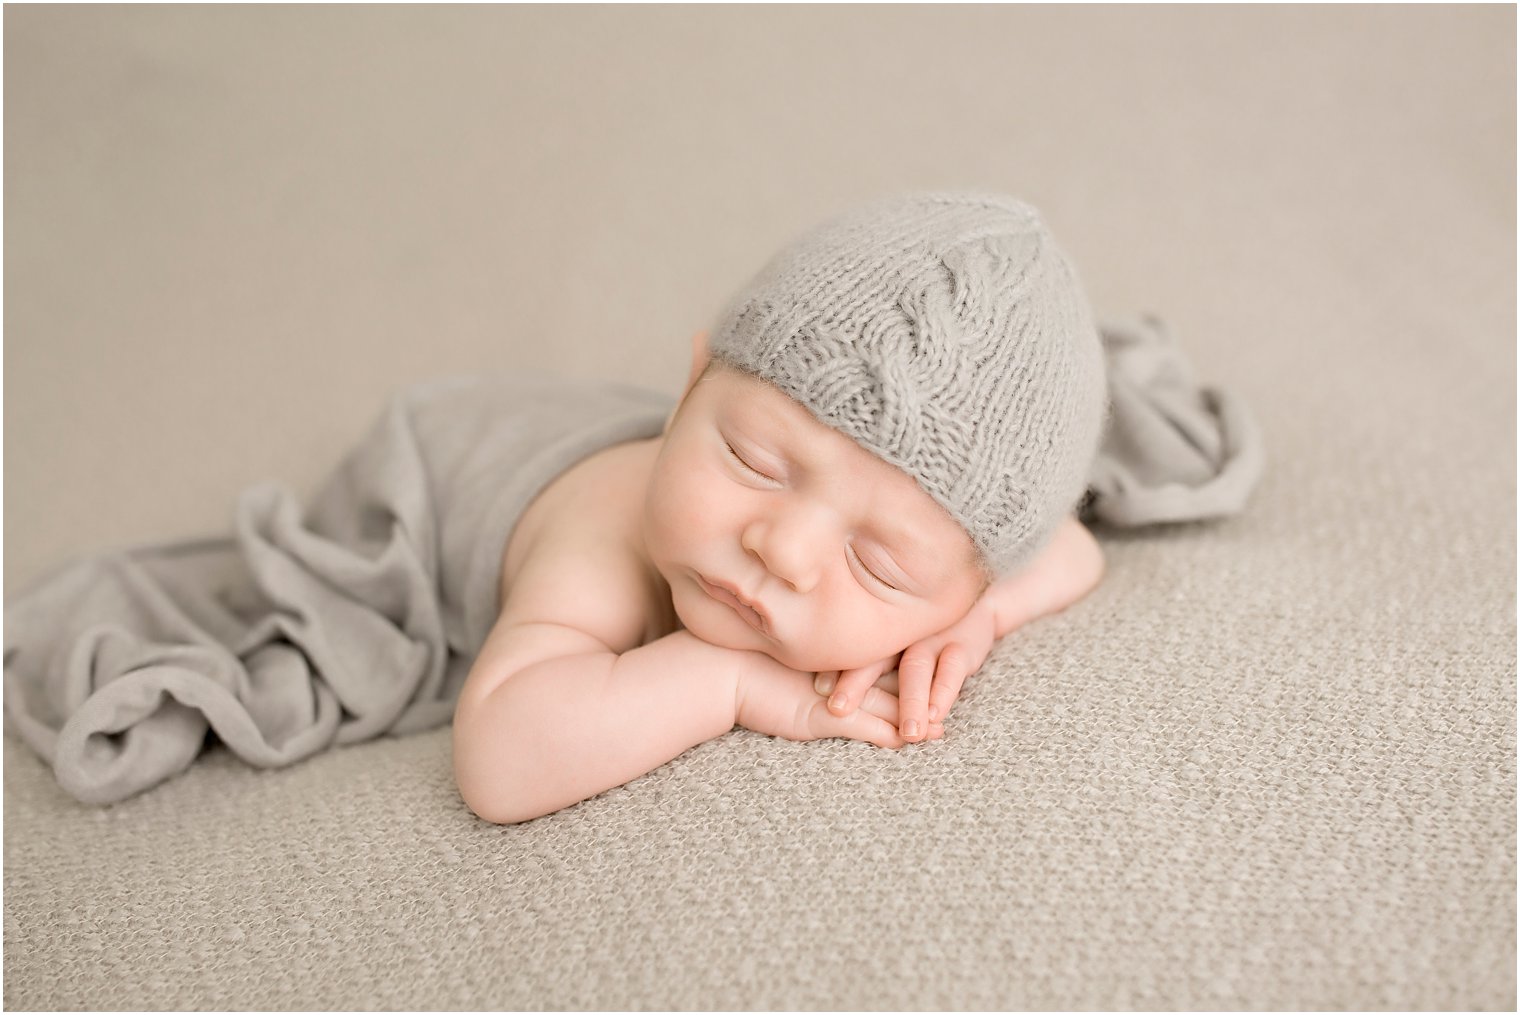 Newborn boy with gray hat and blanket | Photo by Idalia Photography